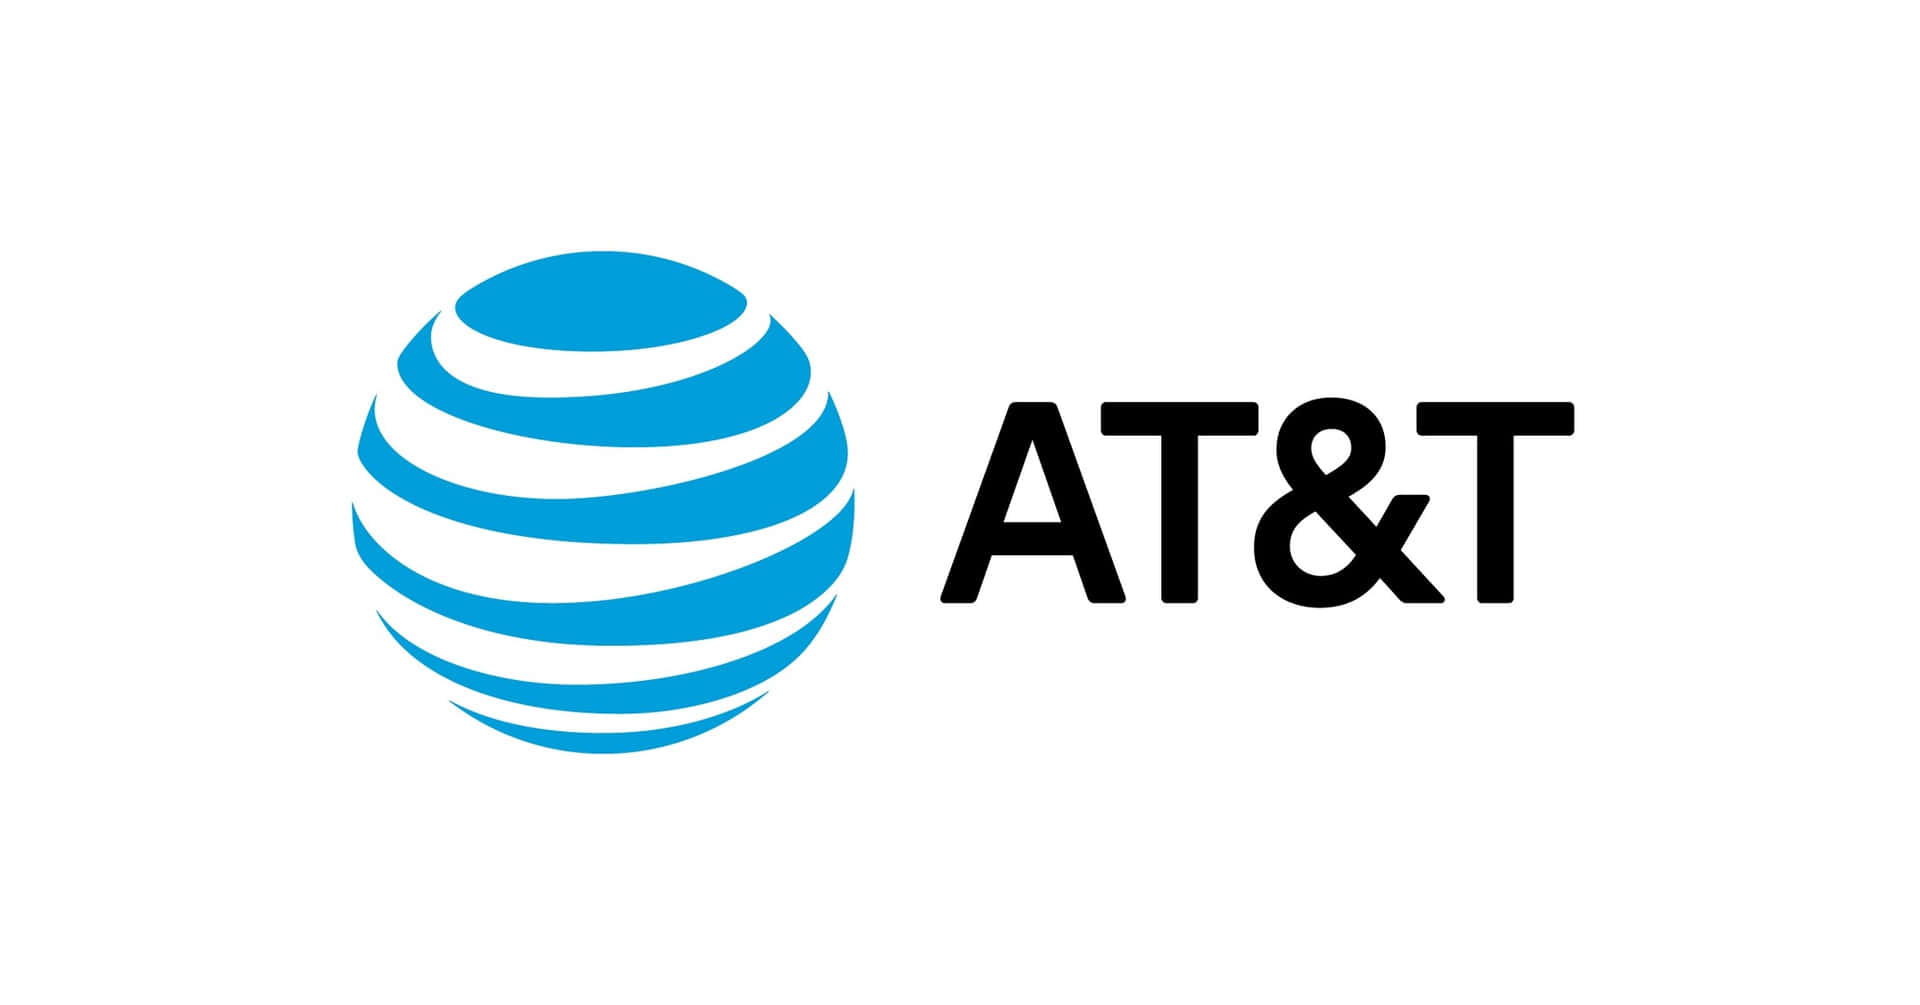 At&t Logo On A White Background Wallpaper